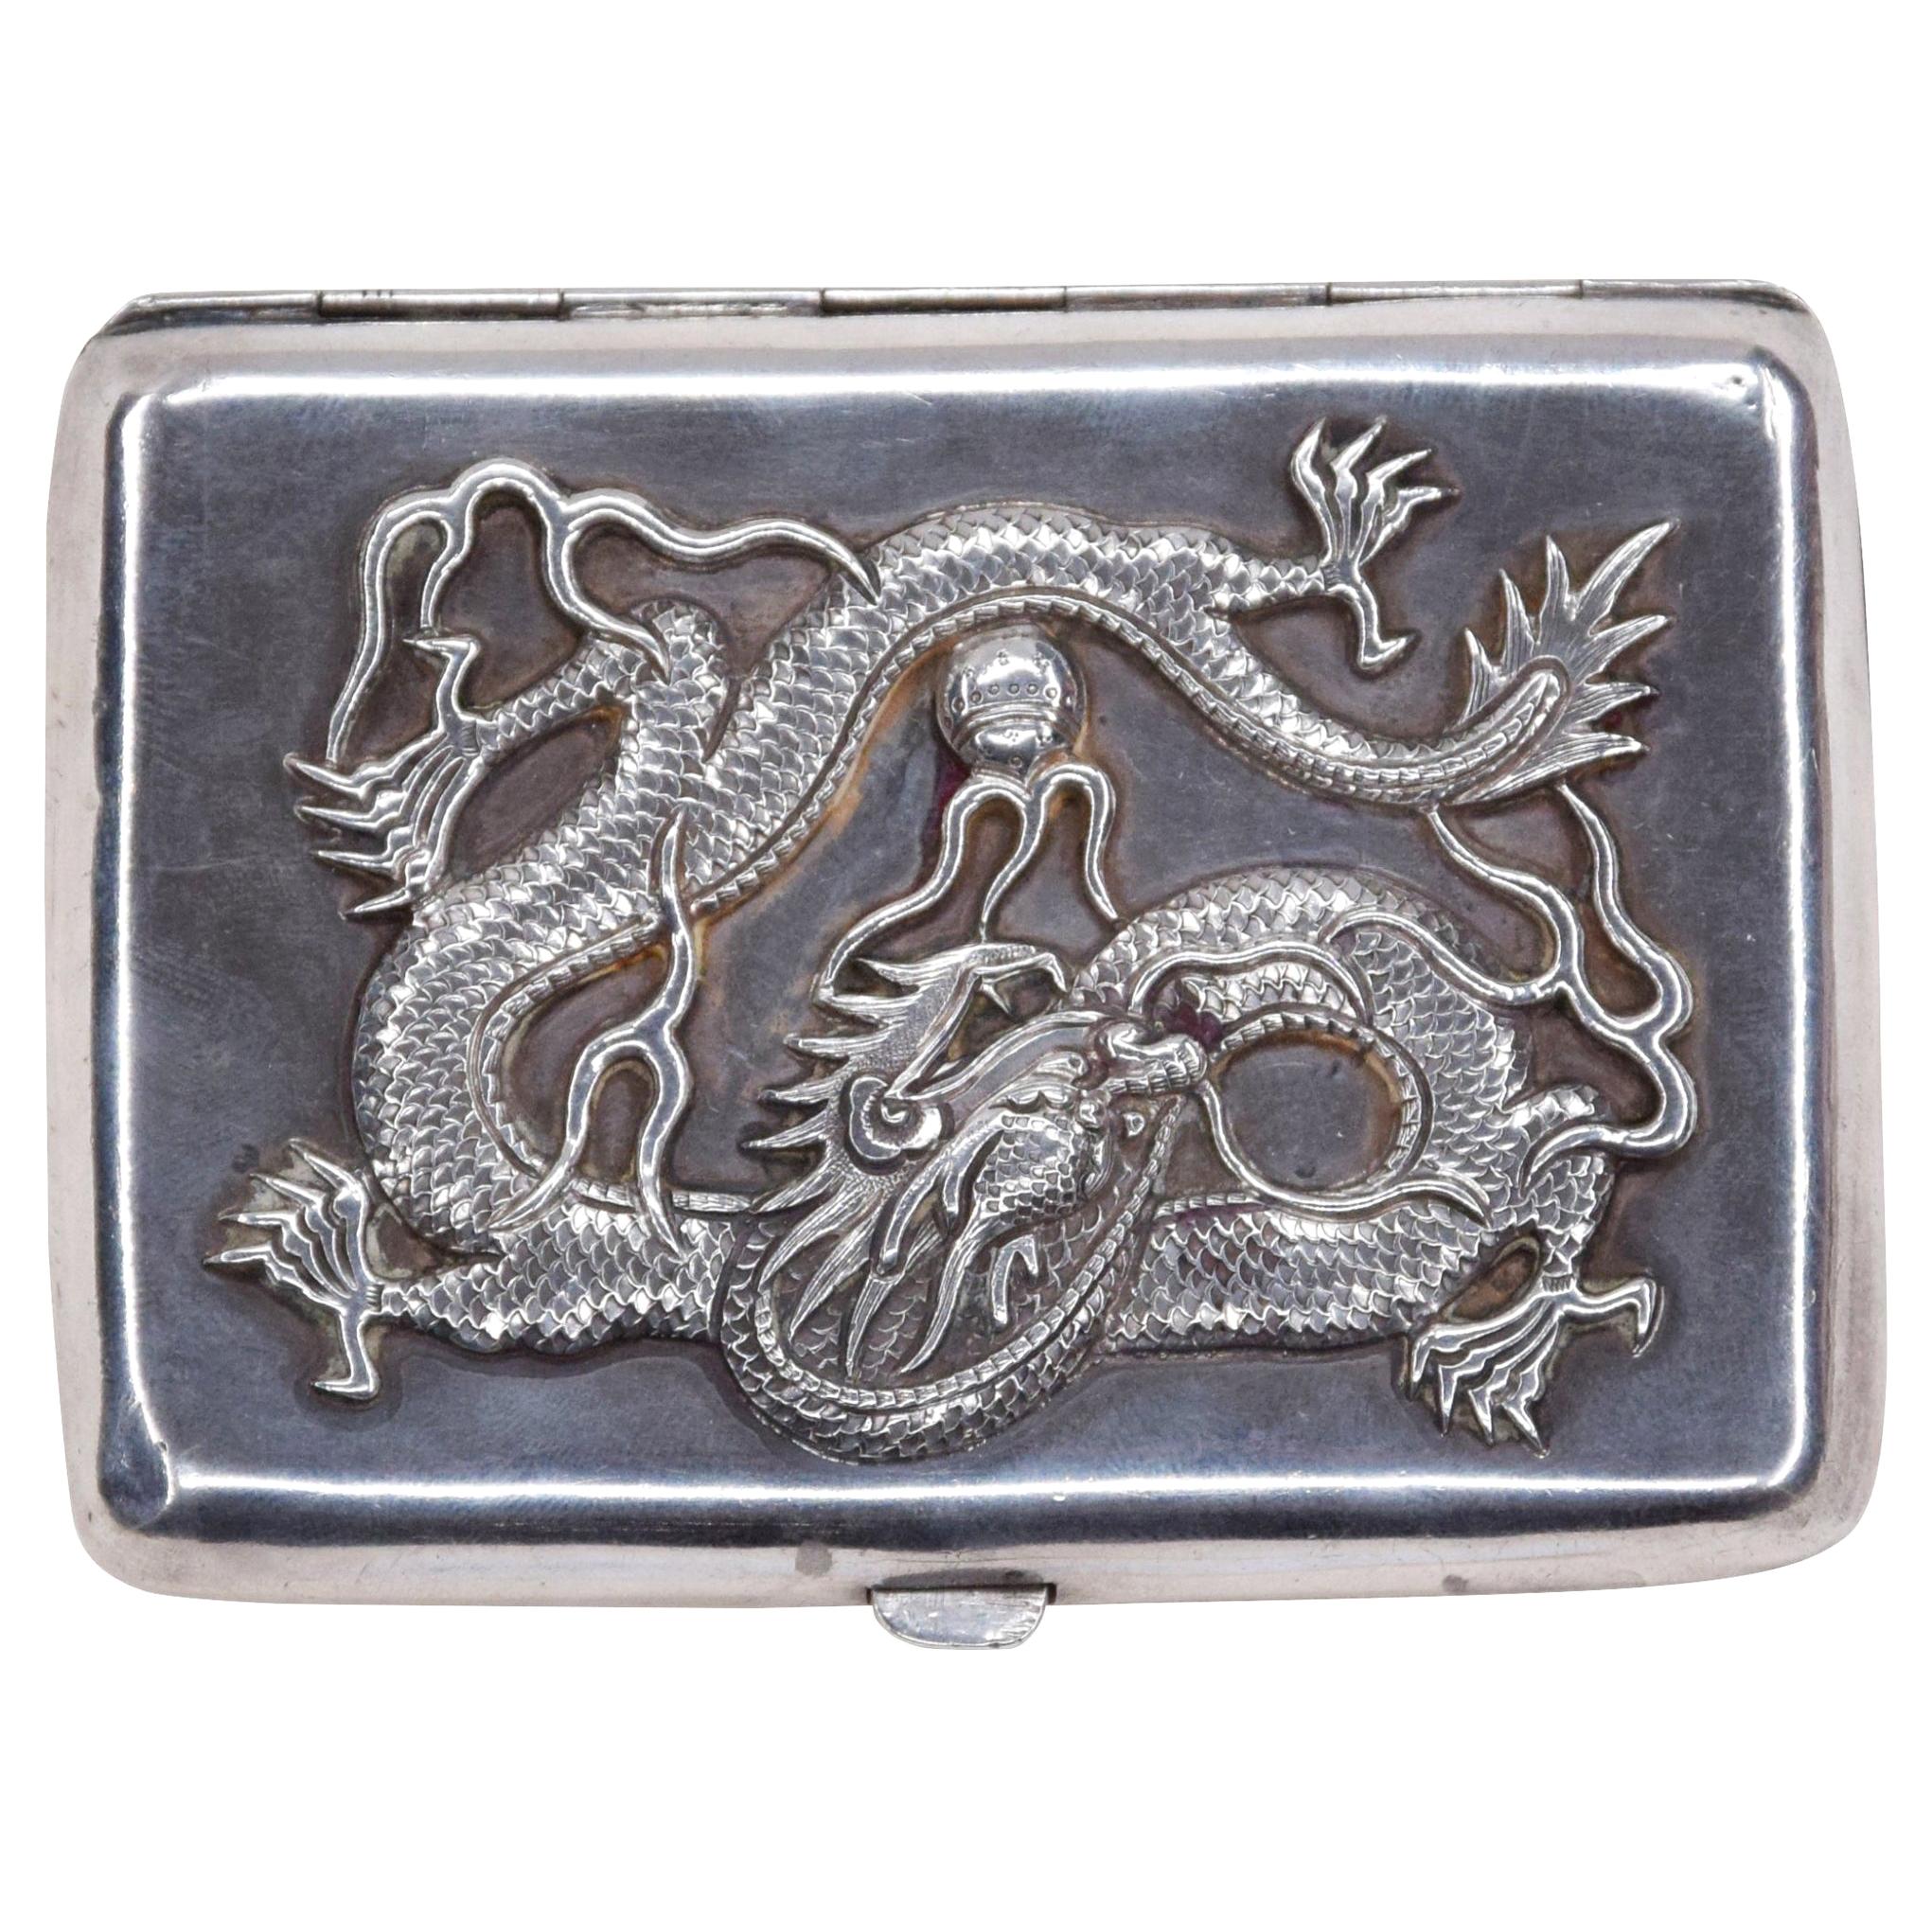 Ancient Chinese Silver Good Luck Box, Early 20th Century